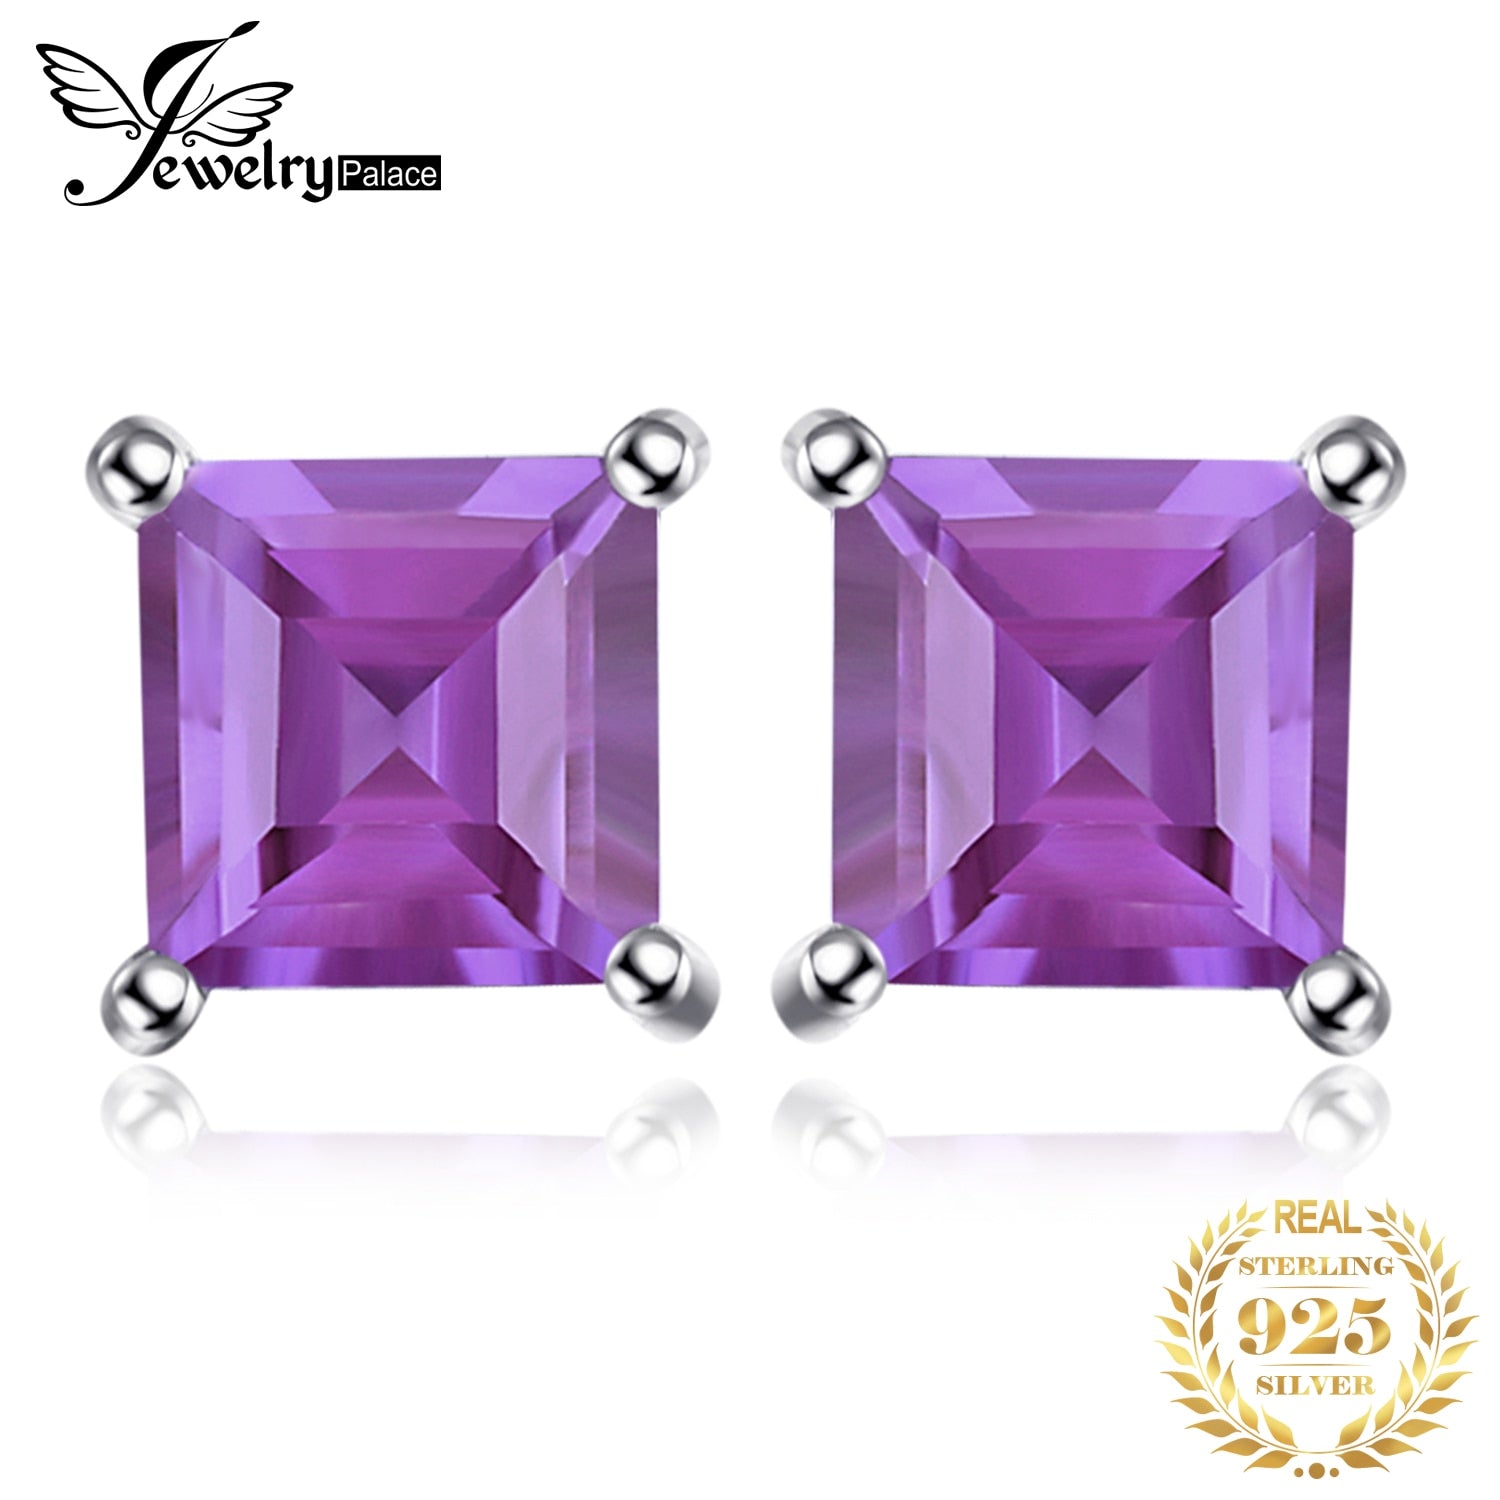 Jewelry Palace Square Genuine Natural Amethyst 925 Sterling Silver Stud Earrings for Women Fashion Jewelry Princess Earrings Default Title